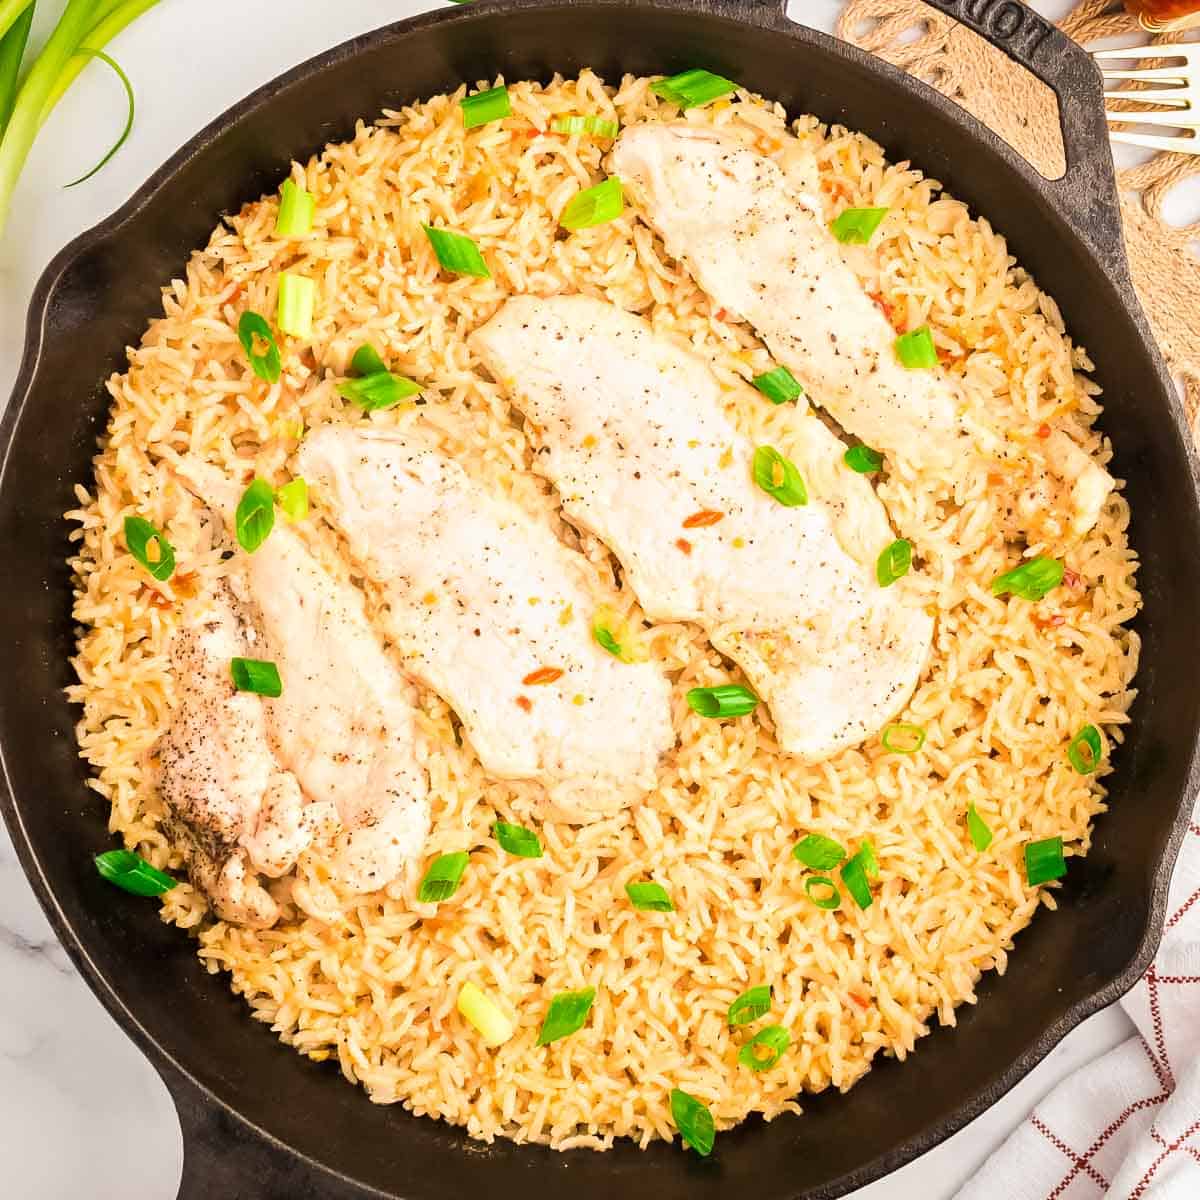 Overhead shot of chicken and rice garnished with green onions in a skillet.